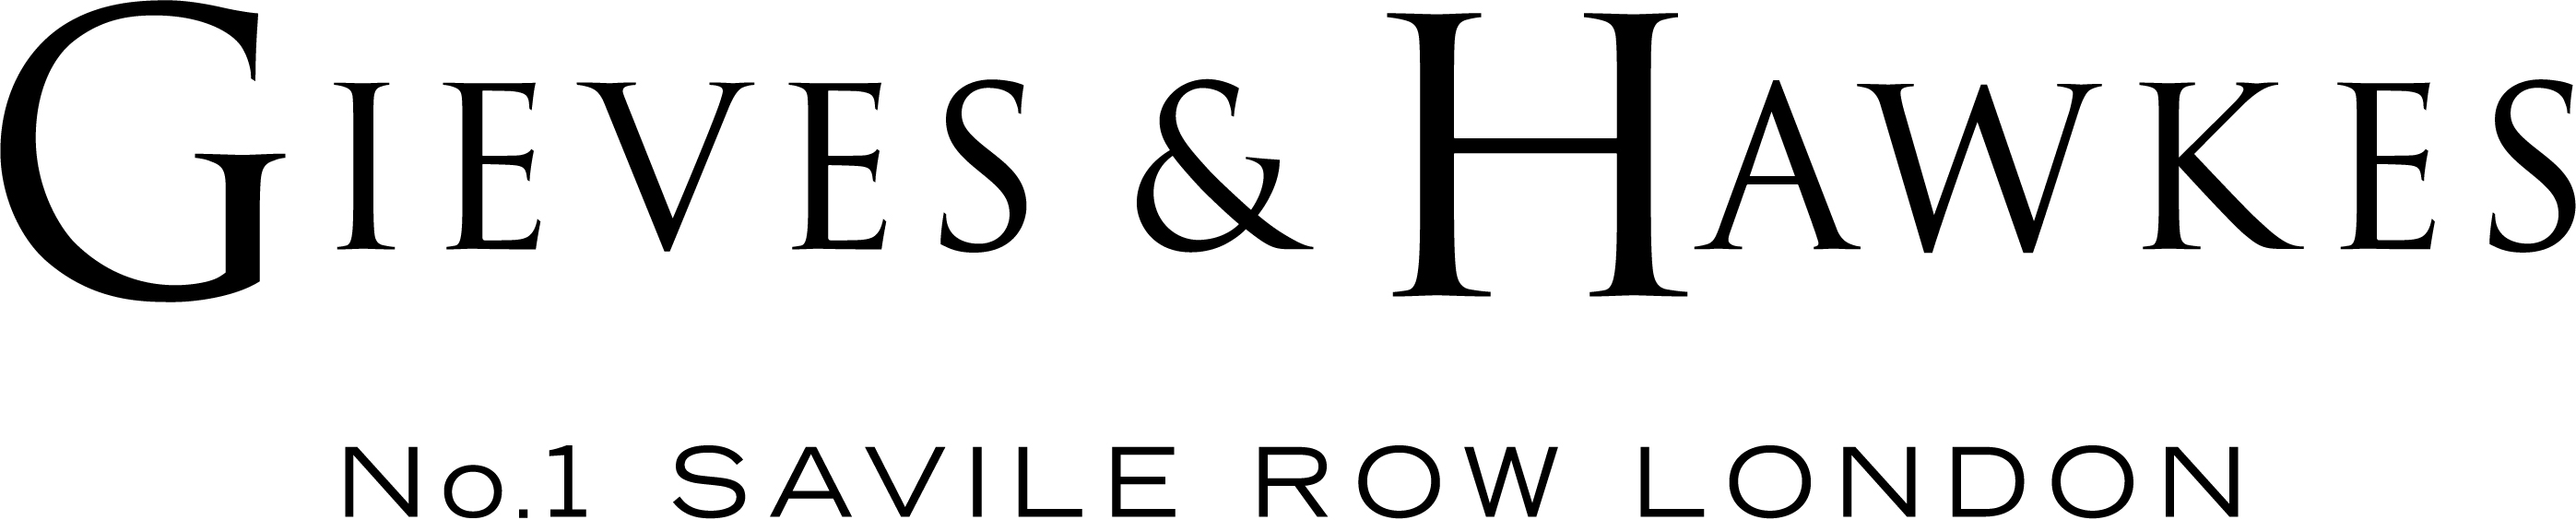 Gieves & Hawkes's logo